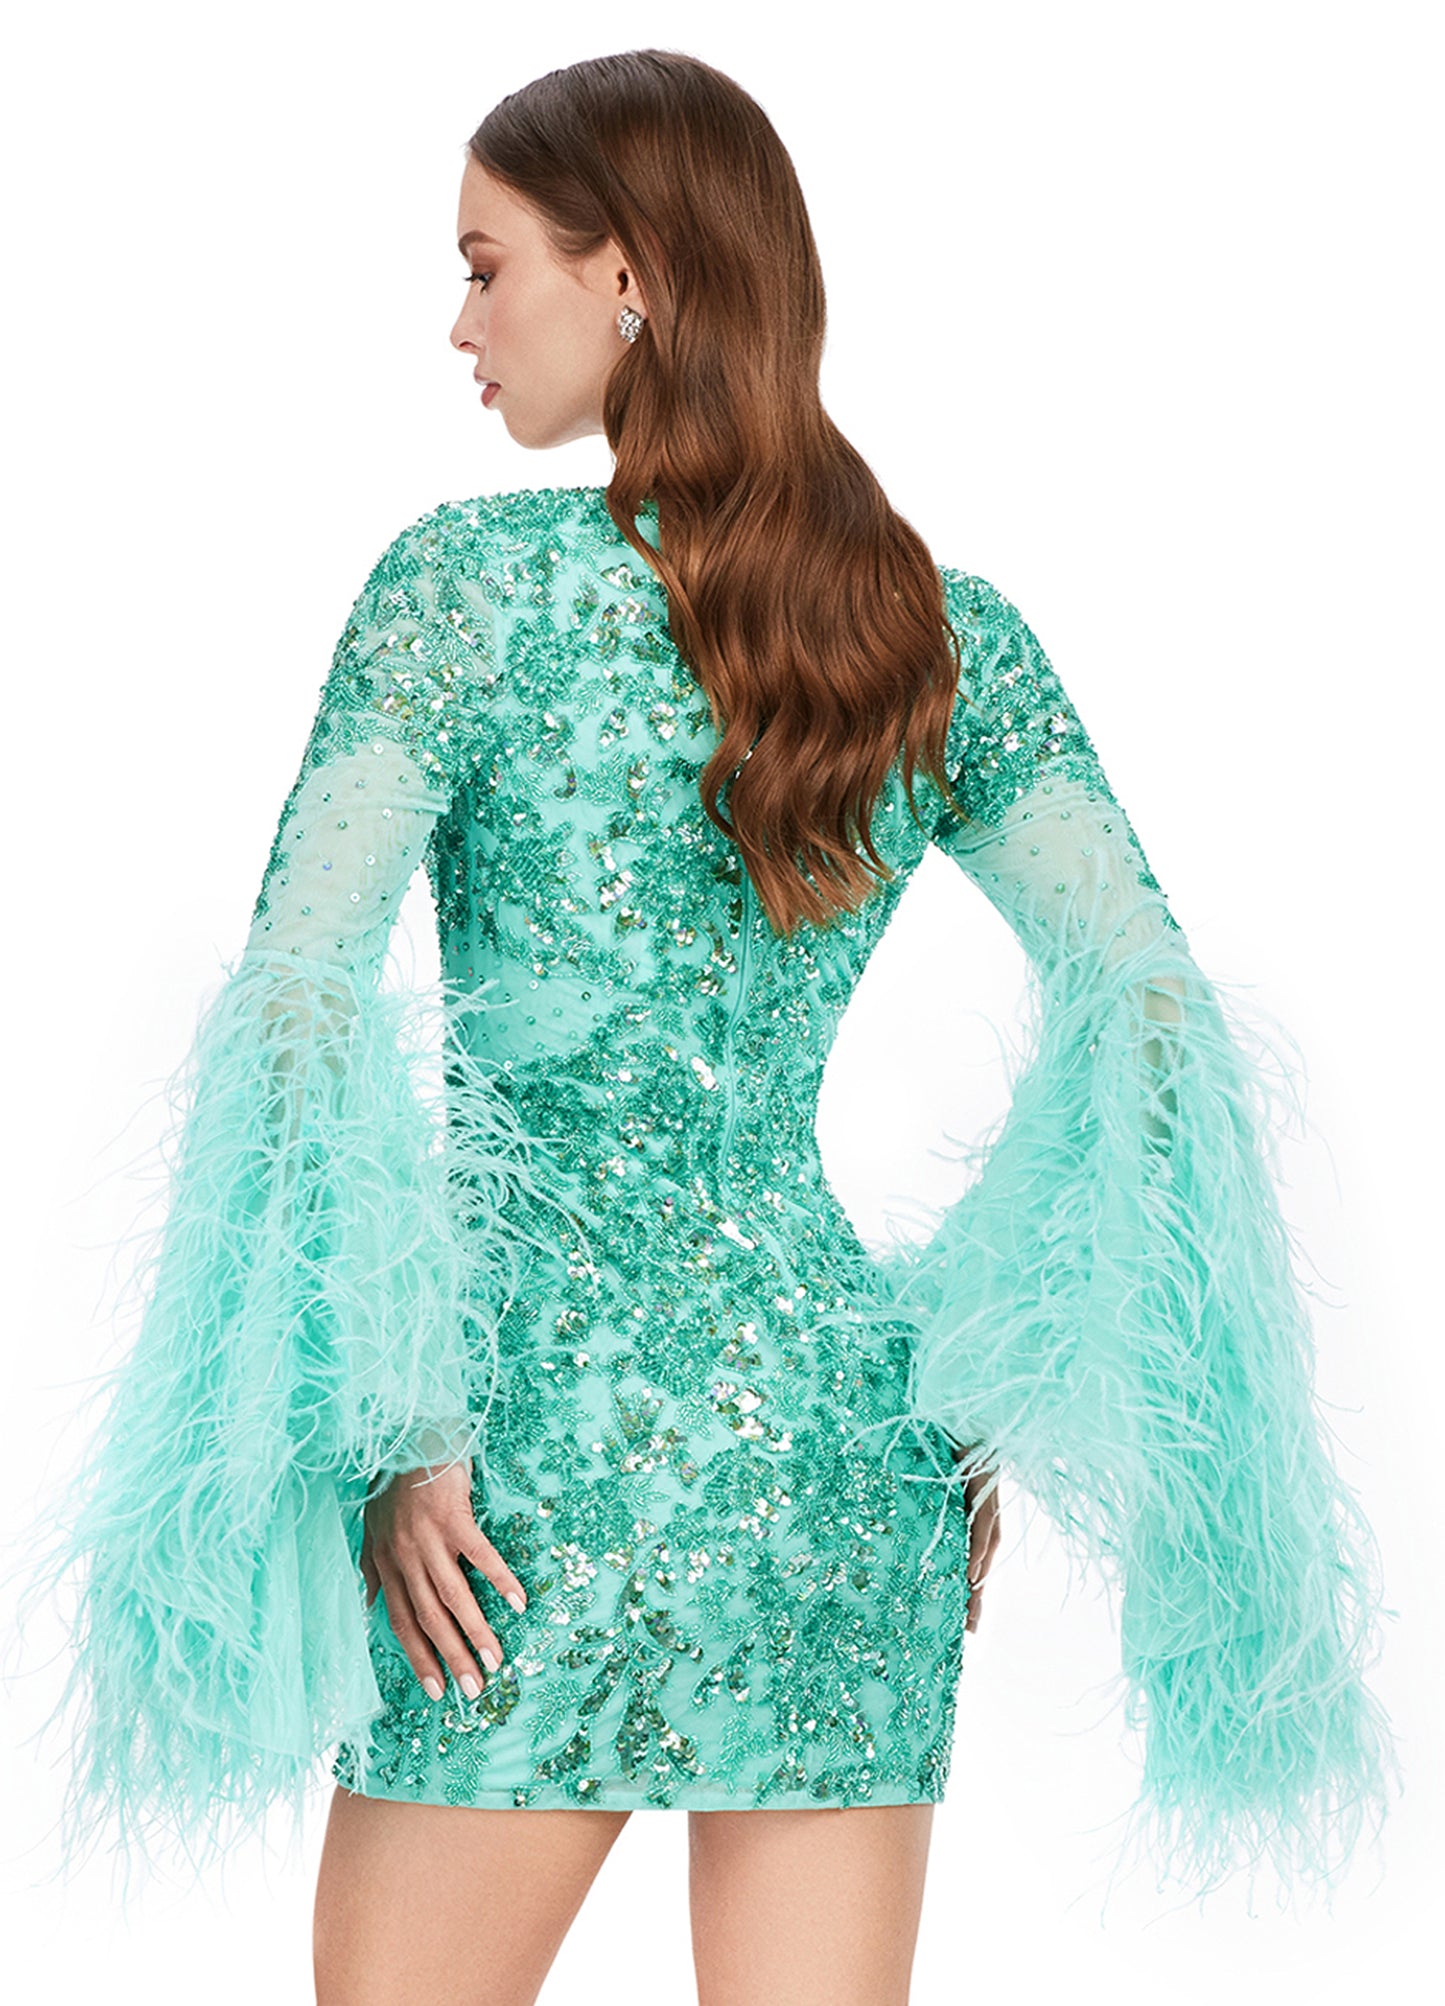 Ashley Lauren 4603 Short Beaded Sequin Long Feather Bell Sleeve Formal Dress Cocktail Gown Pageant Make a statement in this fully beaded cocktail dress with feather adorned flare sleeves! The look is complete with a V-neckline, full back and fitted skirt. V-Neckline Flare Feather Sleeves Fitted Skirt Fully Beaded Sizes: 0-18 Colors: Aqua, Black, Candy Pink, Orchid, Red